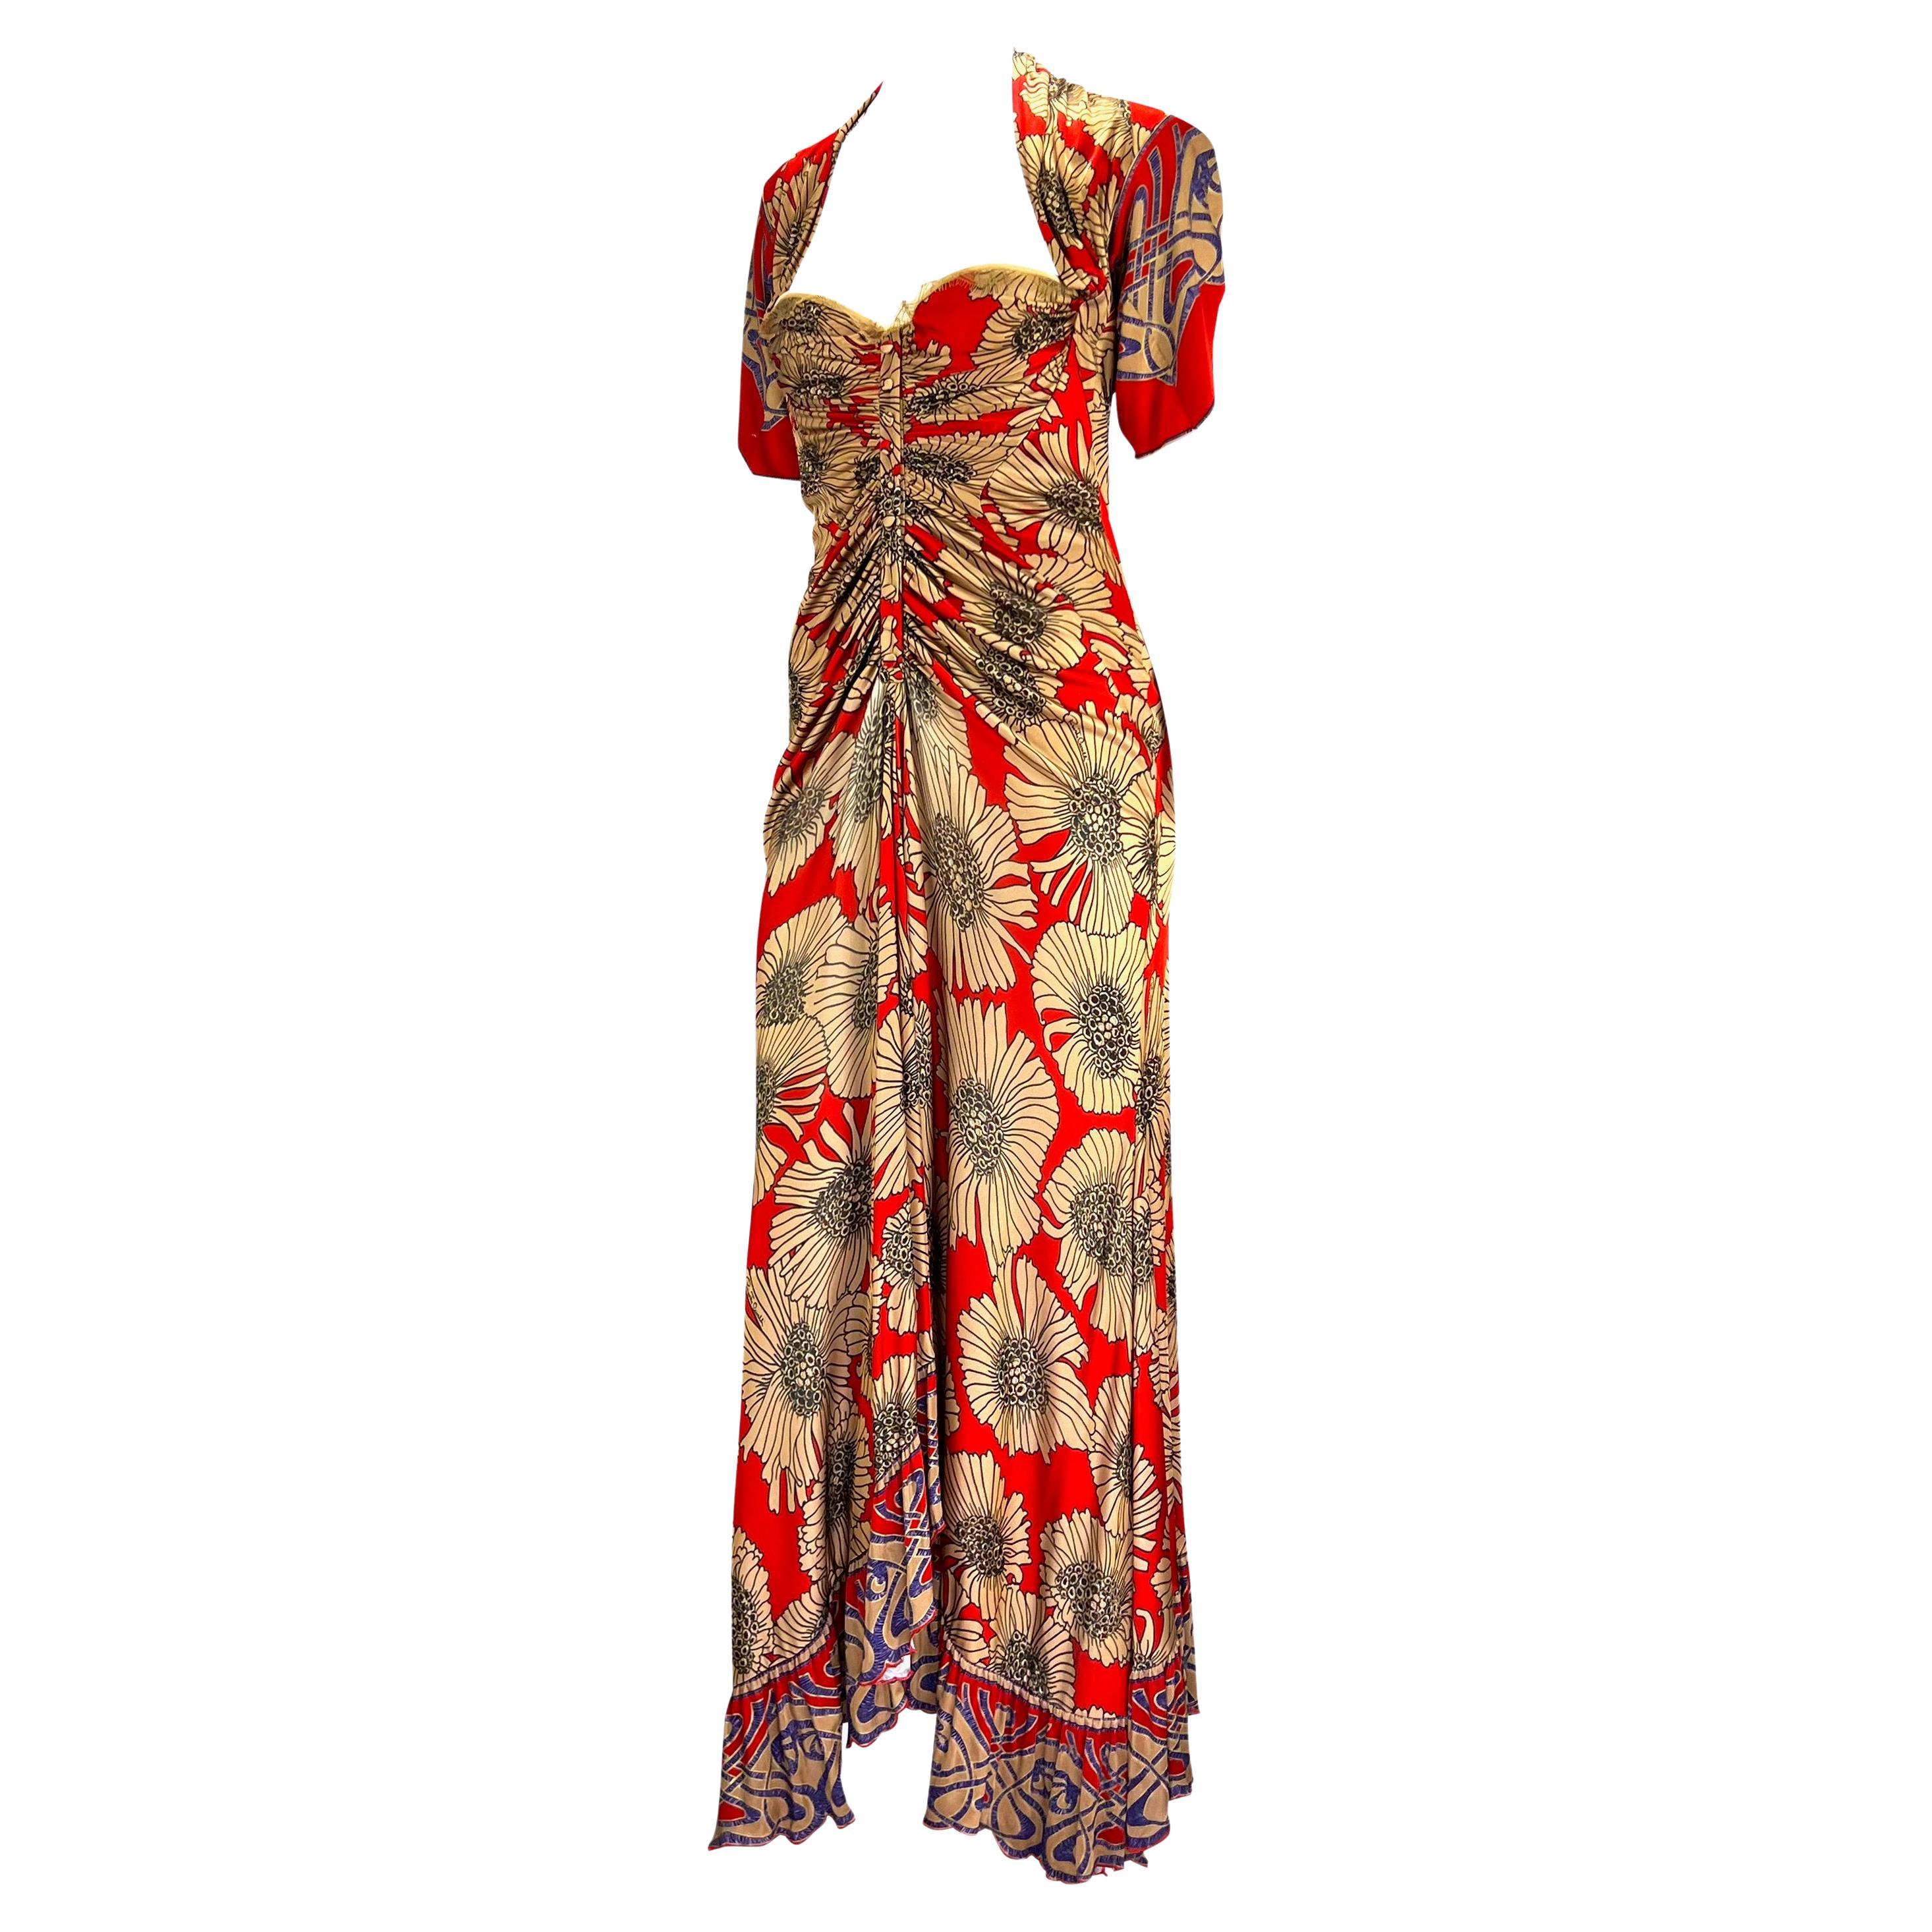 TheRealList presents: a red floral Roberto Cavalli bustier maxi dress. From the Fall/Winter 2006 collection, this dress features quarter-length sleeves with slits at the back, a sweetheart neckline with a faux button-down closure, and pleating at